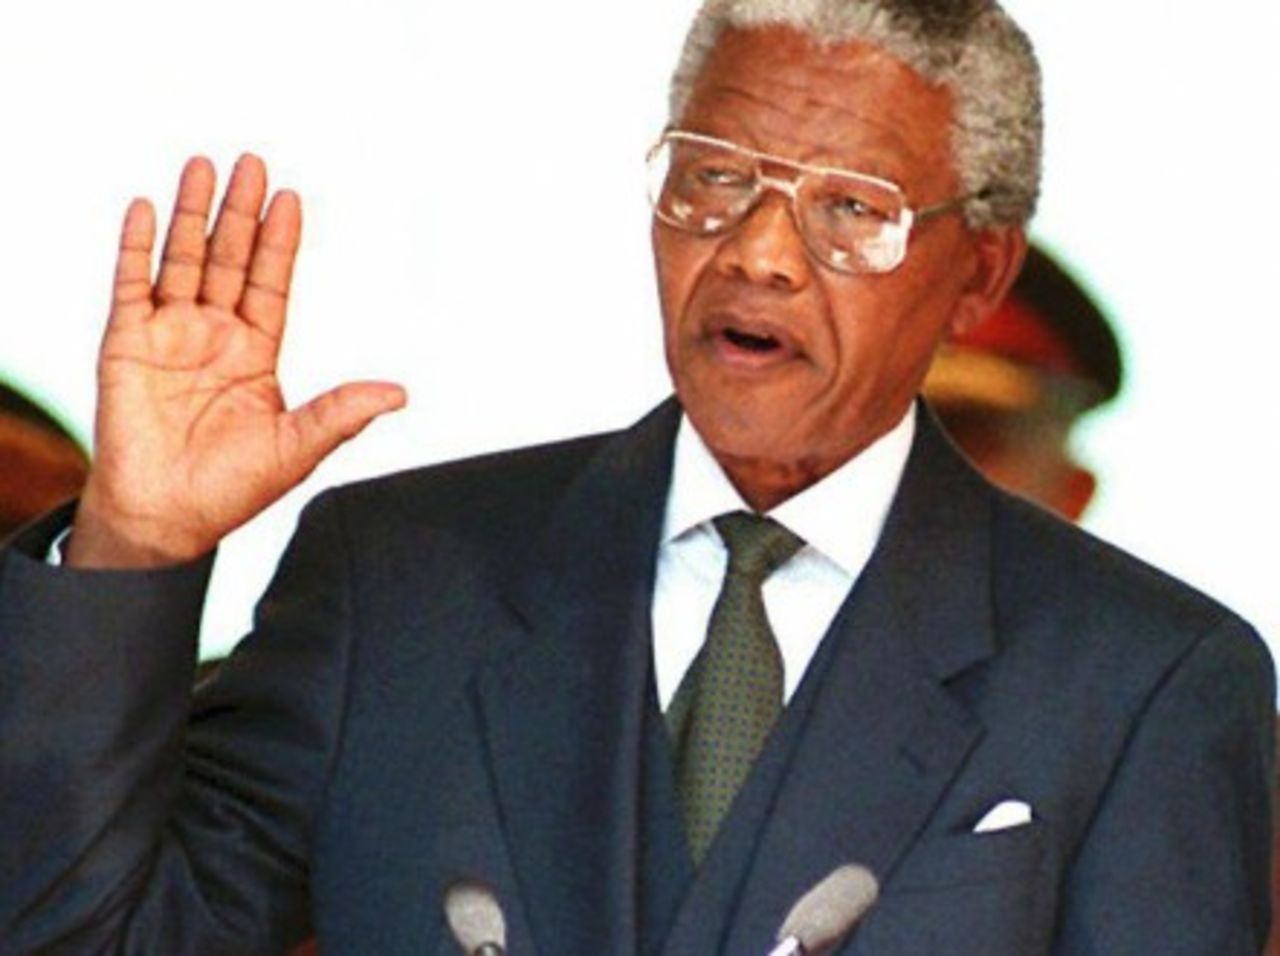 South African President Nelson Mandela takes the oath 10 May 1994 during his inauguration at the Union Building in Pretoria..